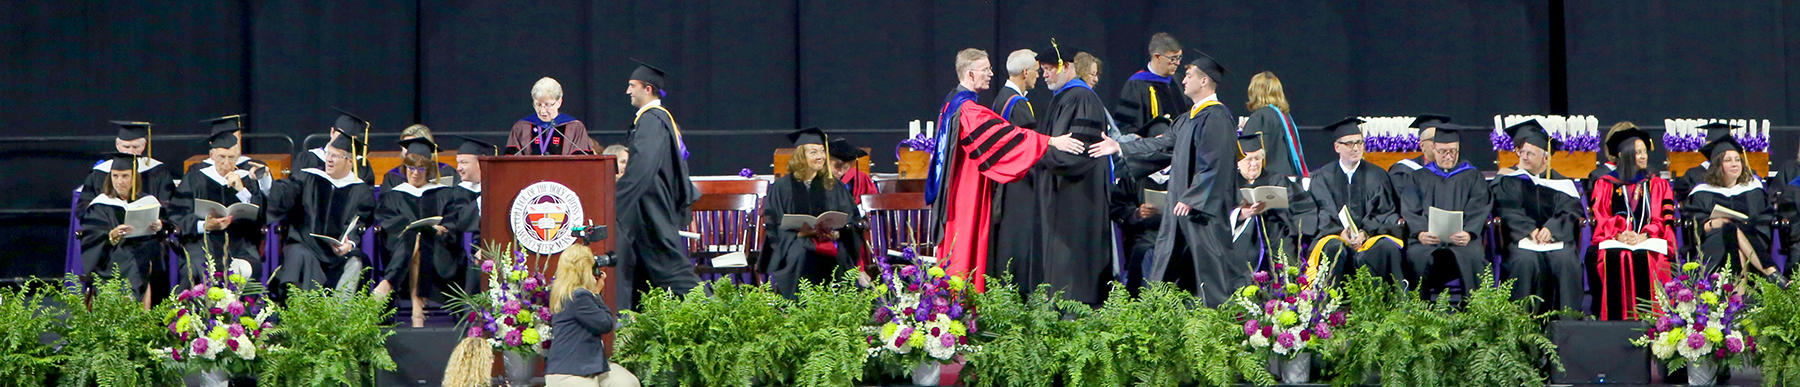 Degrees being conferred to students at Commencement 